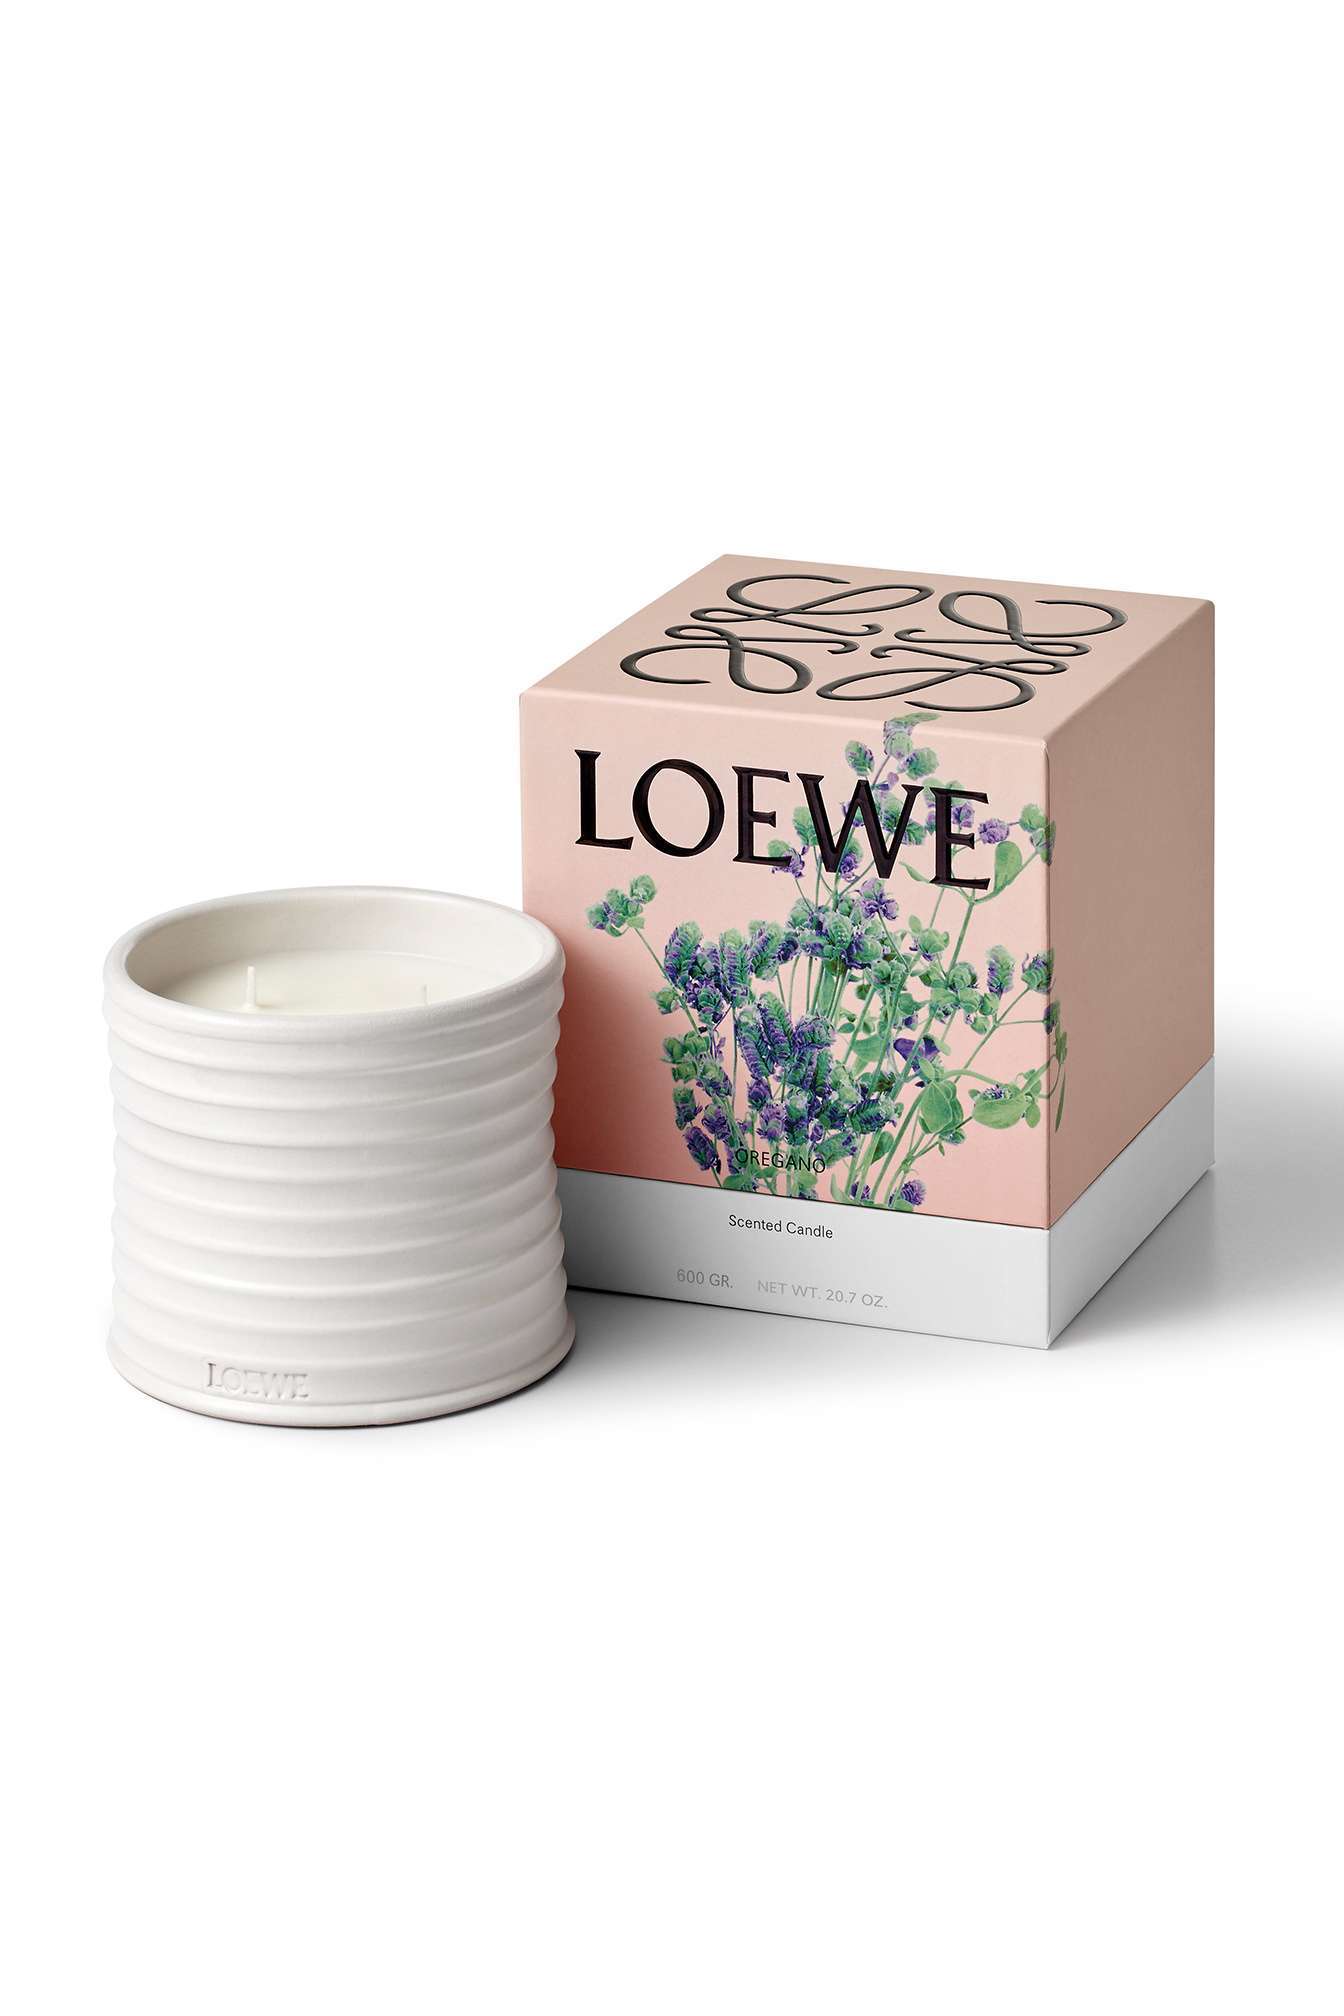 LOEWE-Scented-Candle-with-Packaging-Oregano-Clear-cut